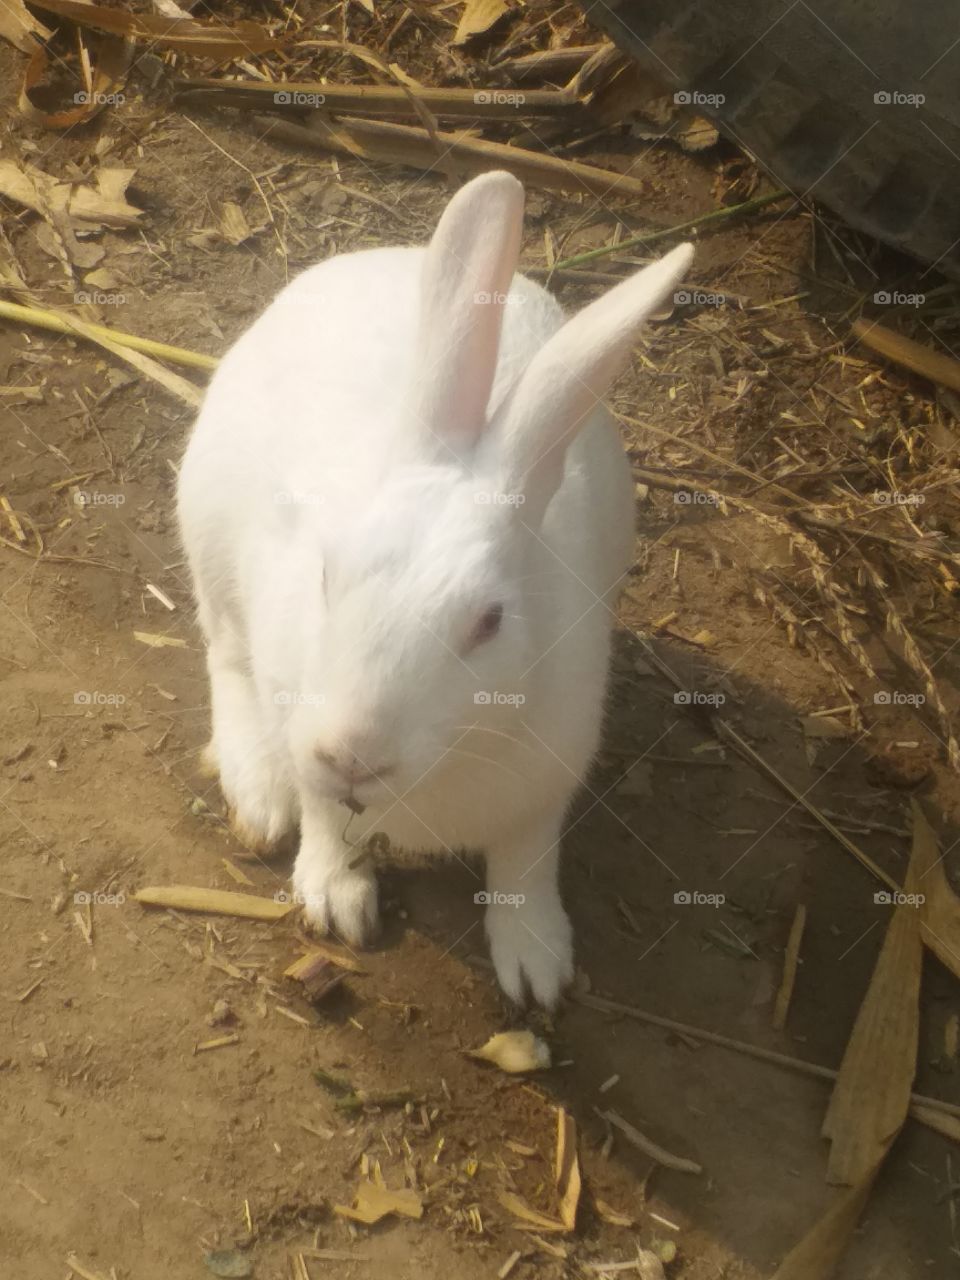 my beautifull Rabbit so awesome picture..